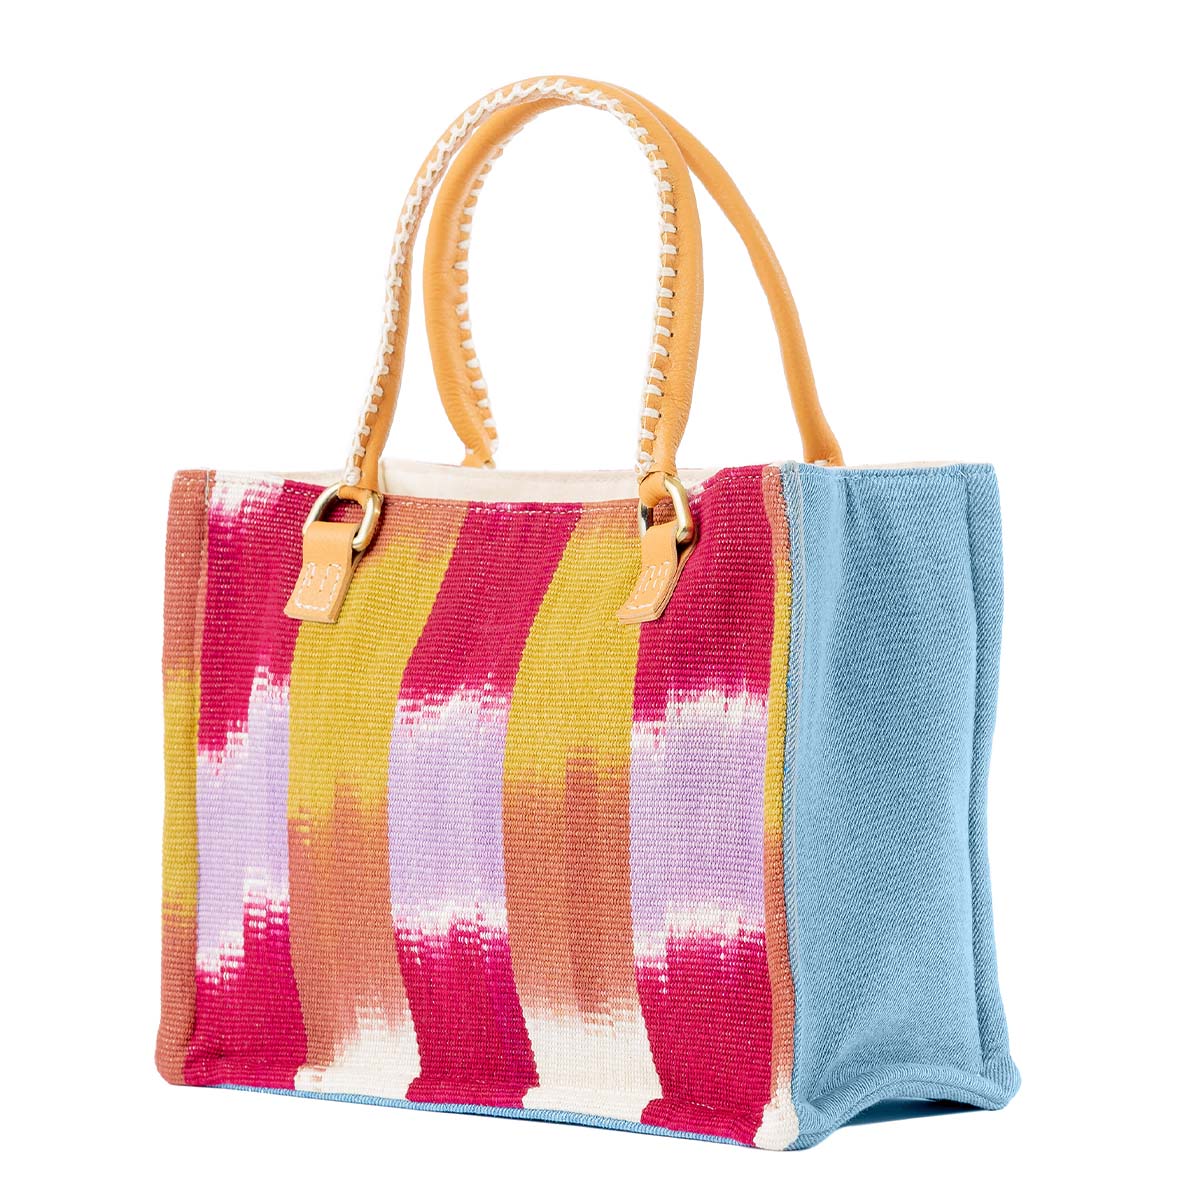 An angle of the Mini Irma Tote in Raspberry Paleta.  It has a flame stitch red, orange, yellow, purple, and white stripes. The sides are sky blue. It has leather handles with white embroidery.